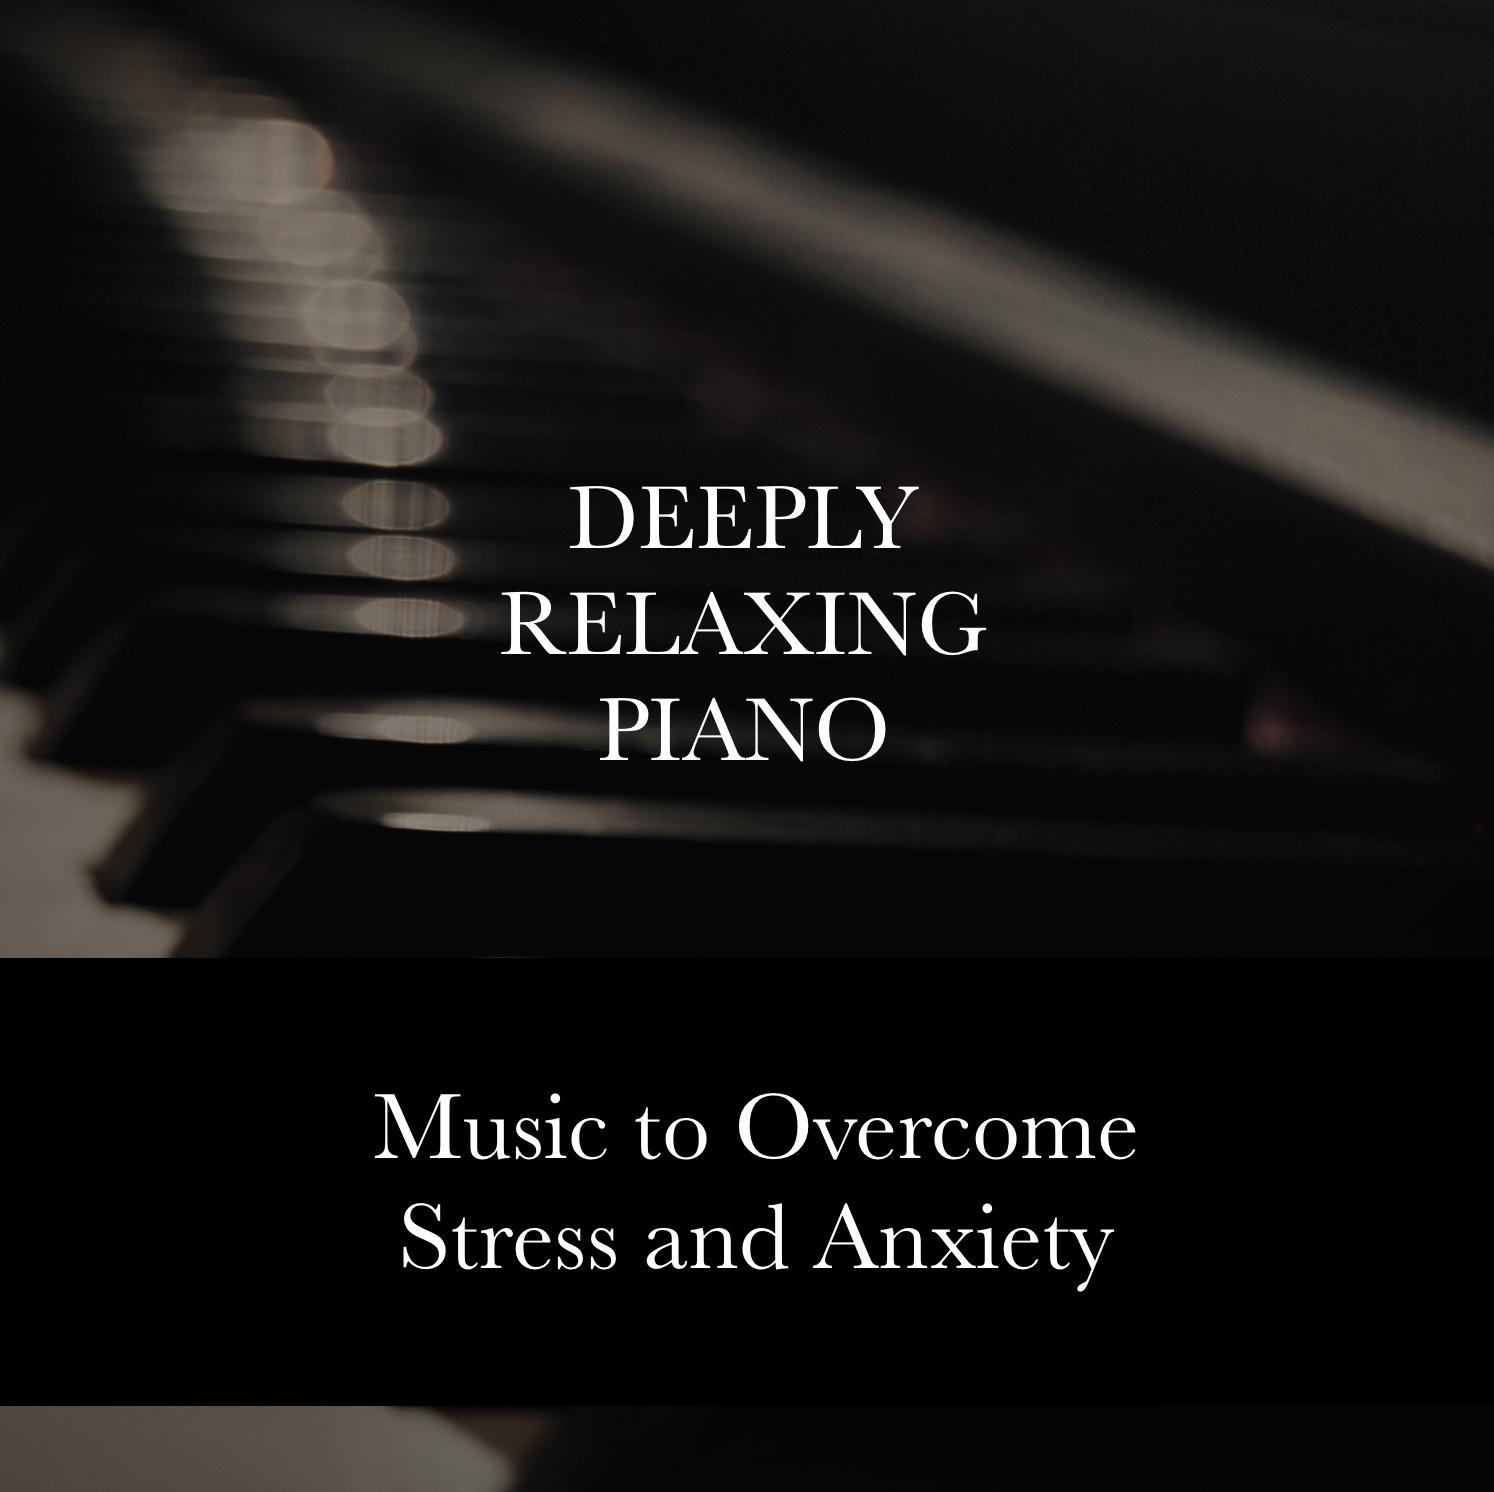 Deeply Relaxing Piano - Melodies to Overcome Stress and Anxiety